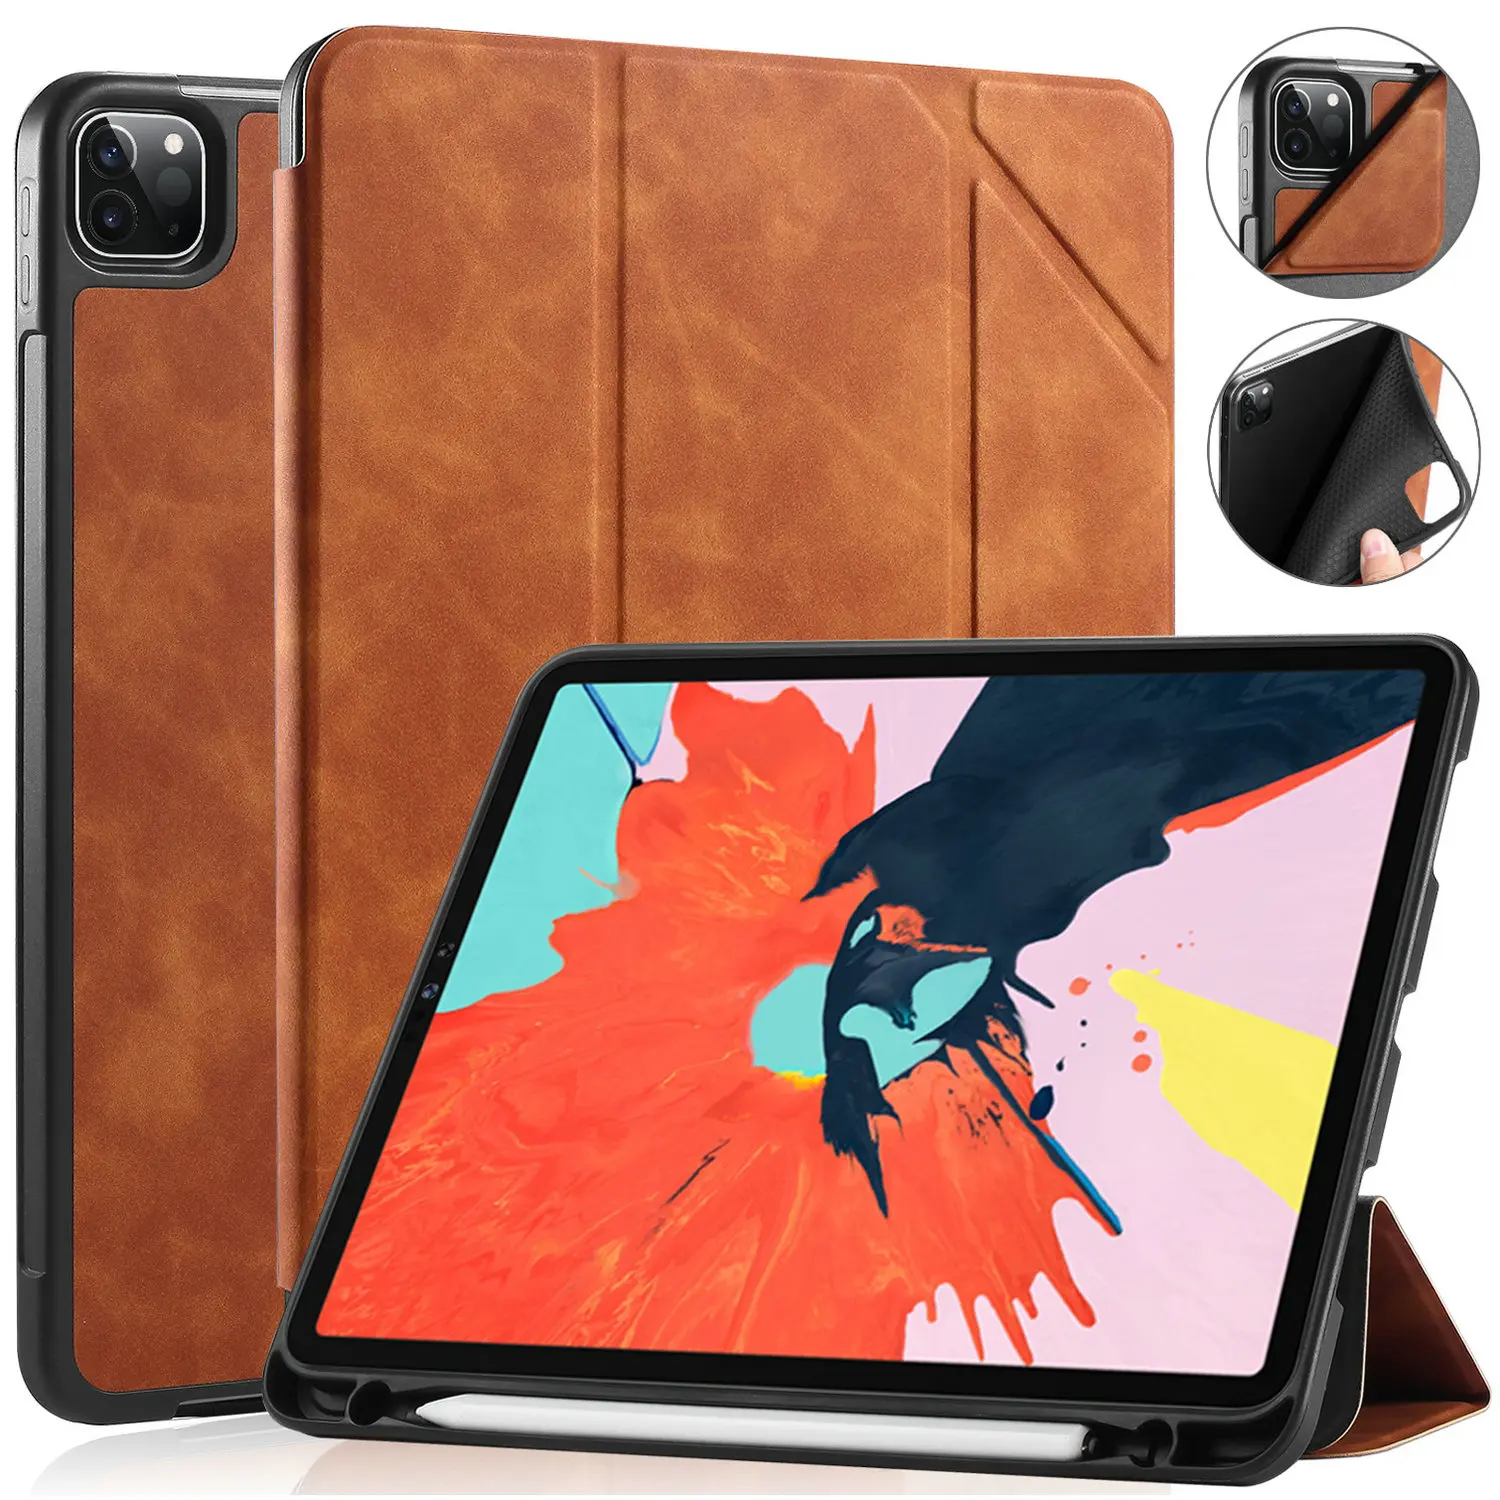 Case for iPad Air 5th Generation (2022) / iPad Air 4th (2020) 10.9 Inch 10.5 10.2 11 Auto Sleep/Wake Protective PU Leather Cover